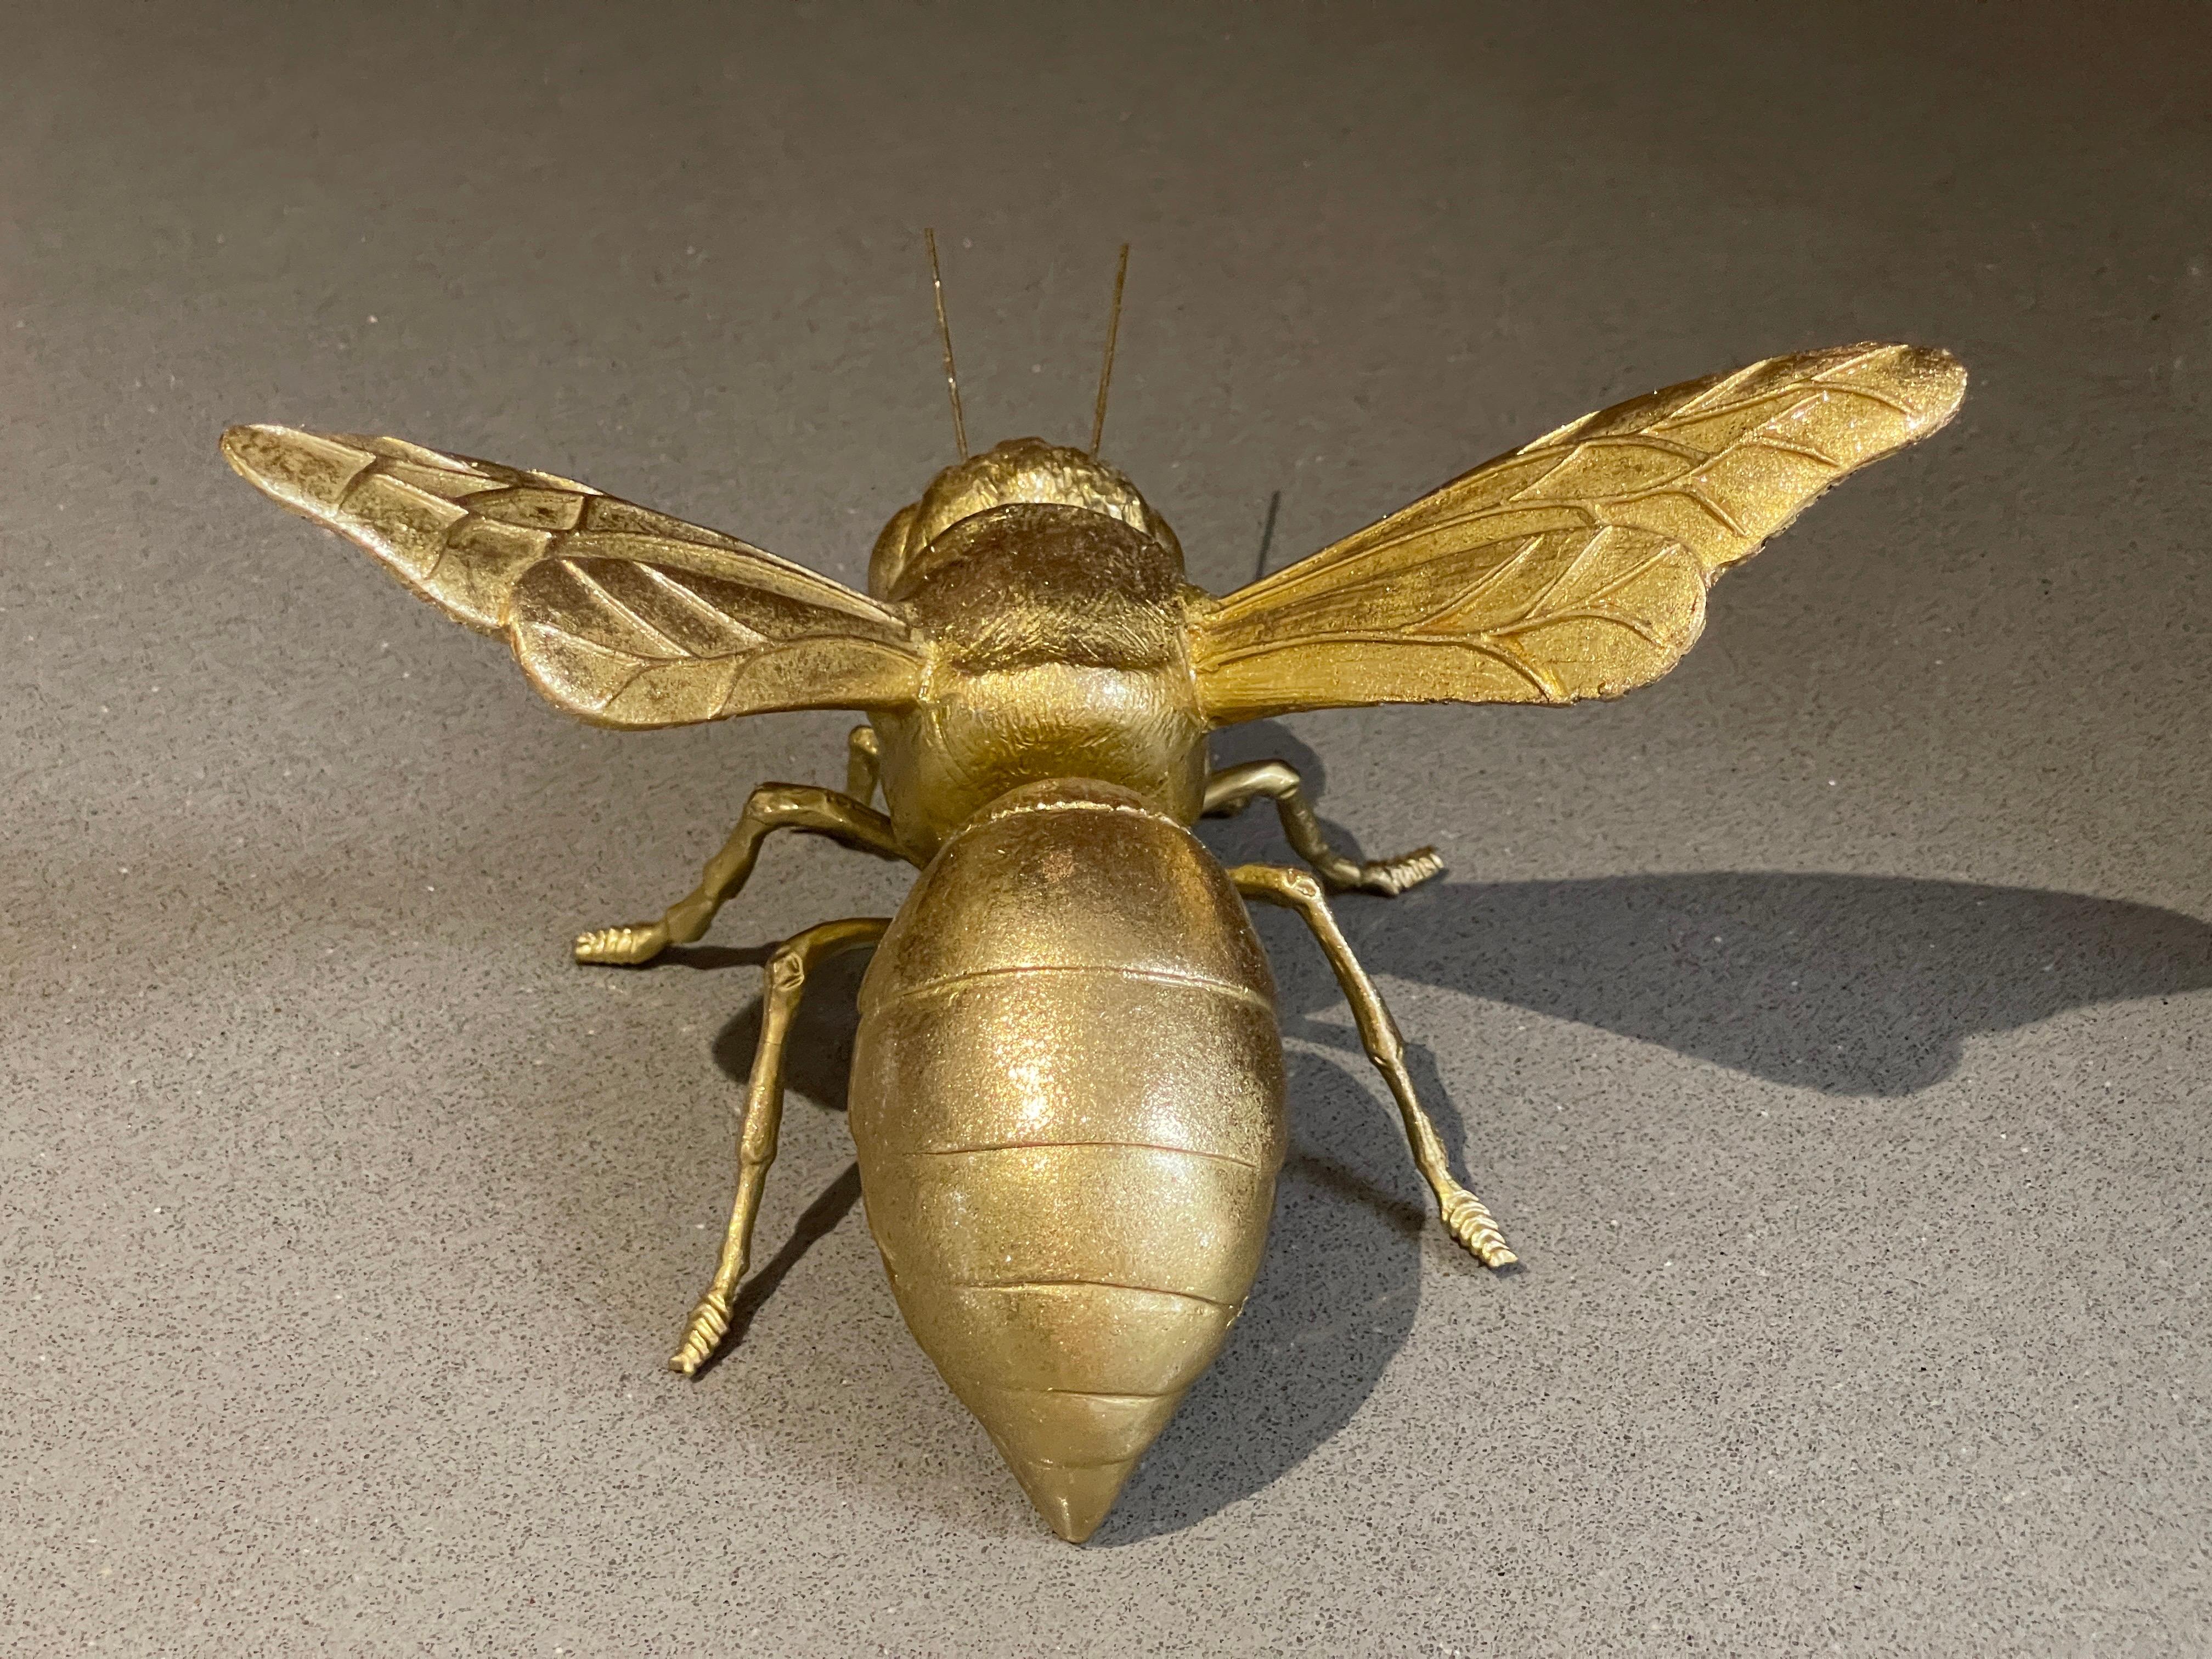 Metal Vintage Decorative Gold Bee Ornament Bumble Bee Sculpture LUXURY ORNAMENT GOLD  For Sale